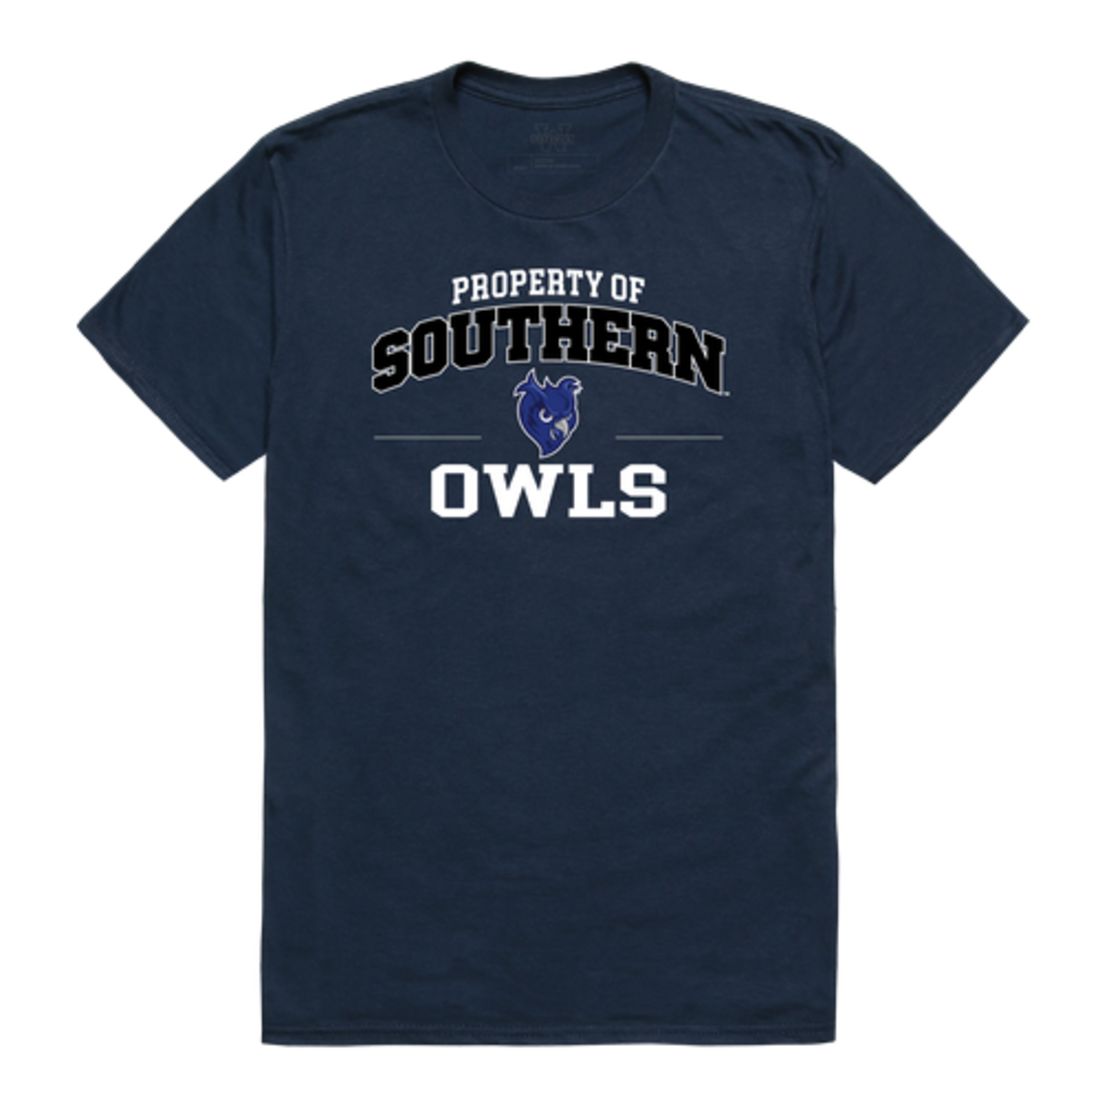 Southern Connecticut State University Owls Property T-Shirt